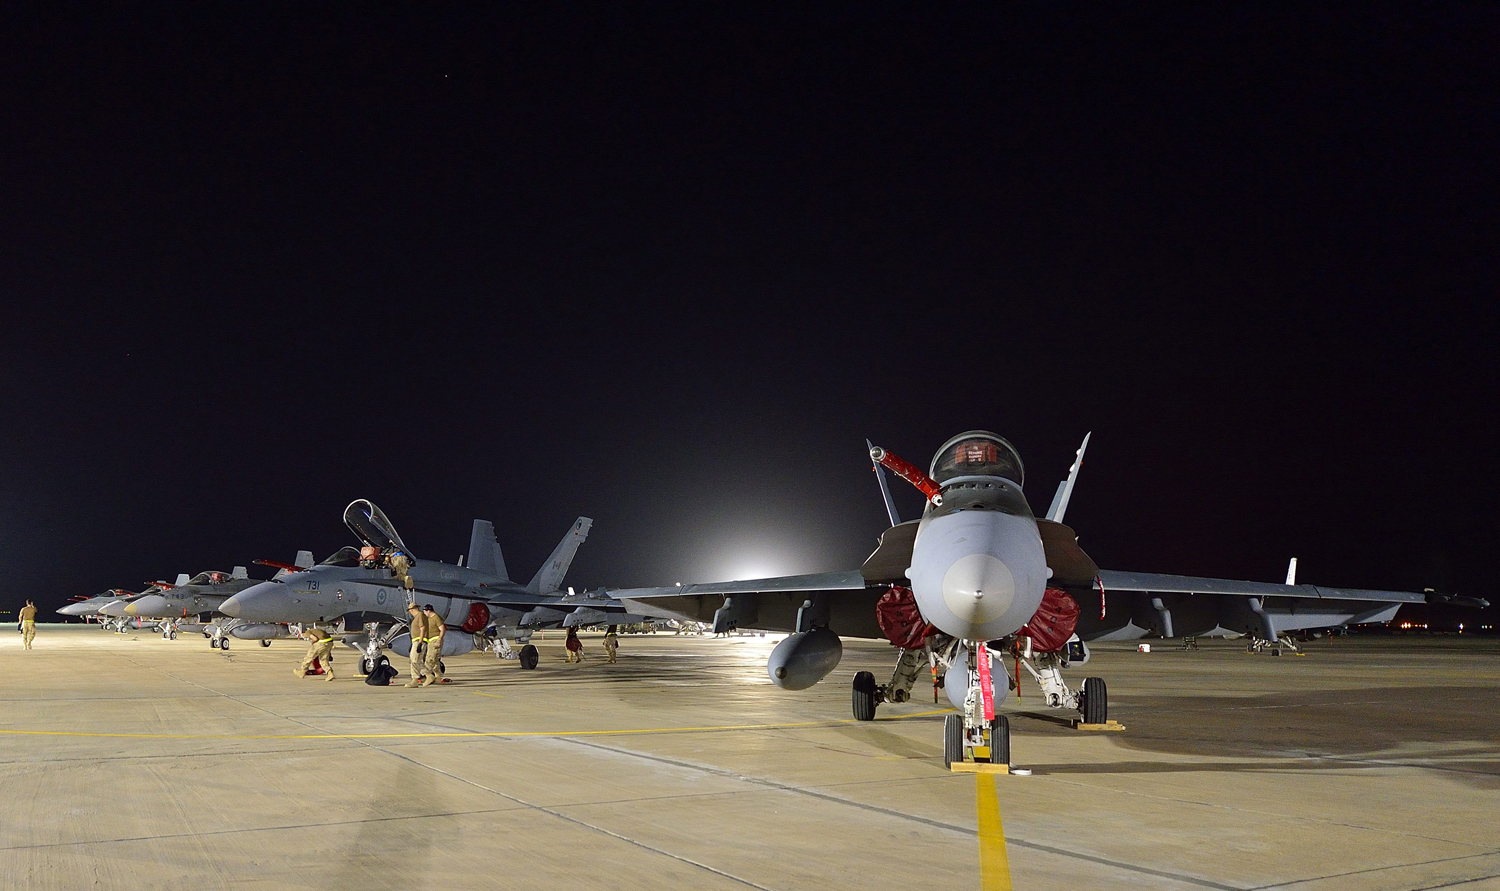 A Canadian Armed Forces CF-18 Fighter jets arrive at the Canadian Air Task Force Flight Operations Area in Kuwait